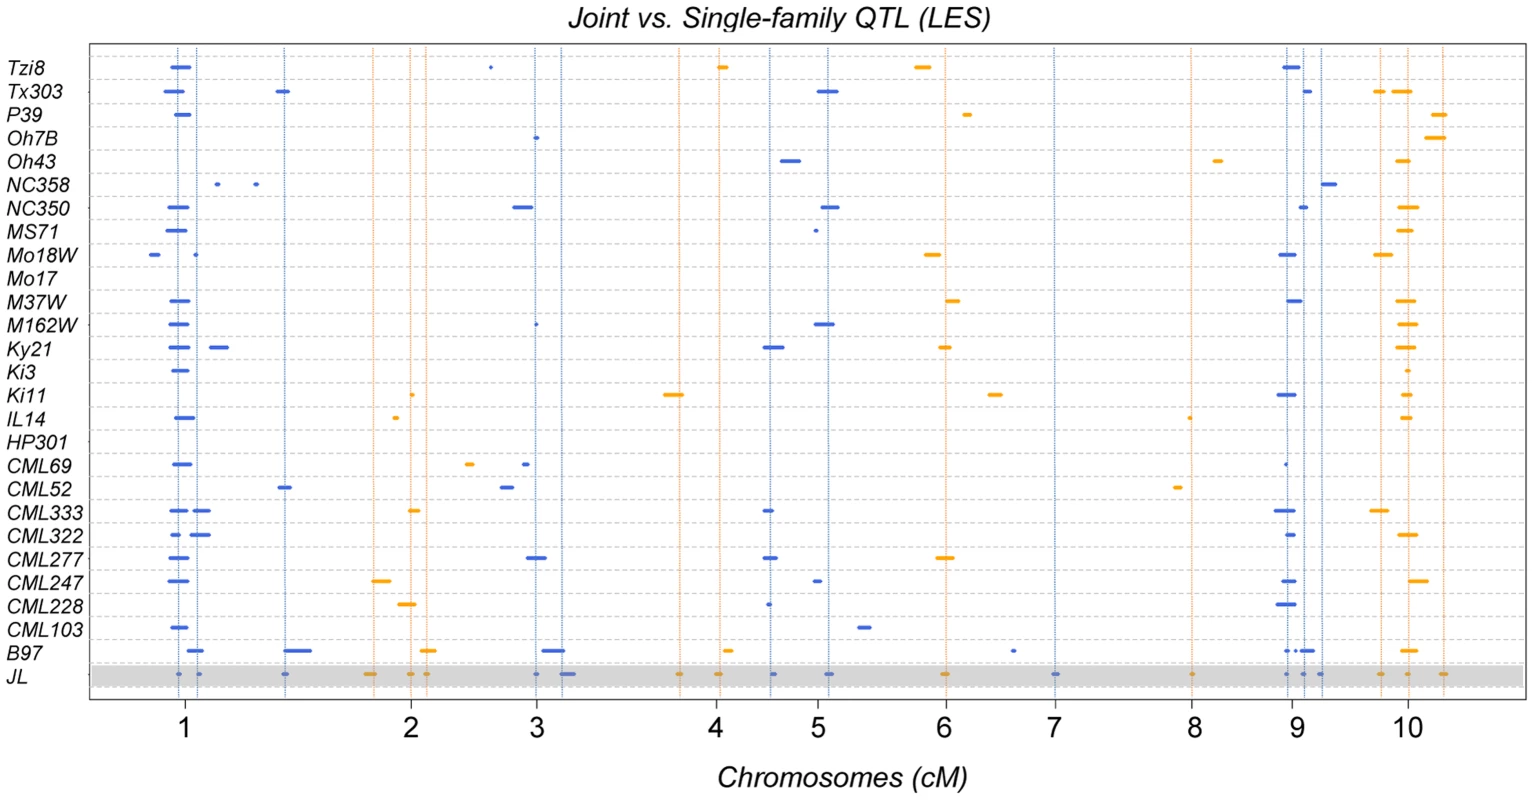 LES QTL obtained from single and joint-linkage QTL analysis across all the 10 maize chromosomes/linkage groups.